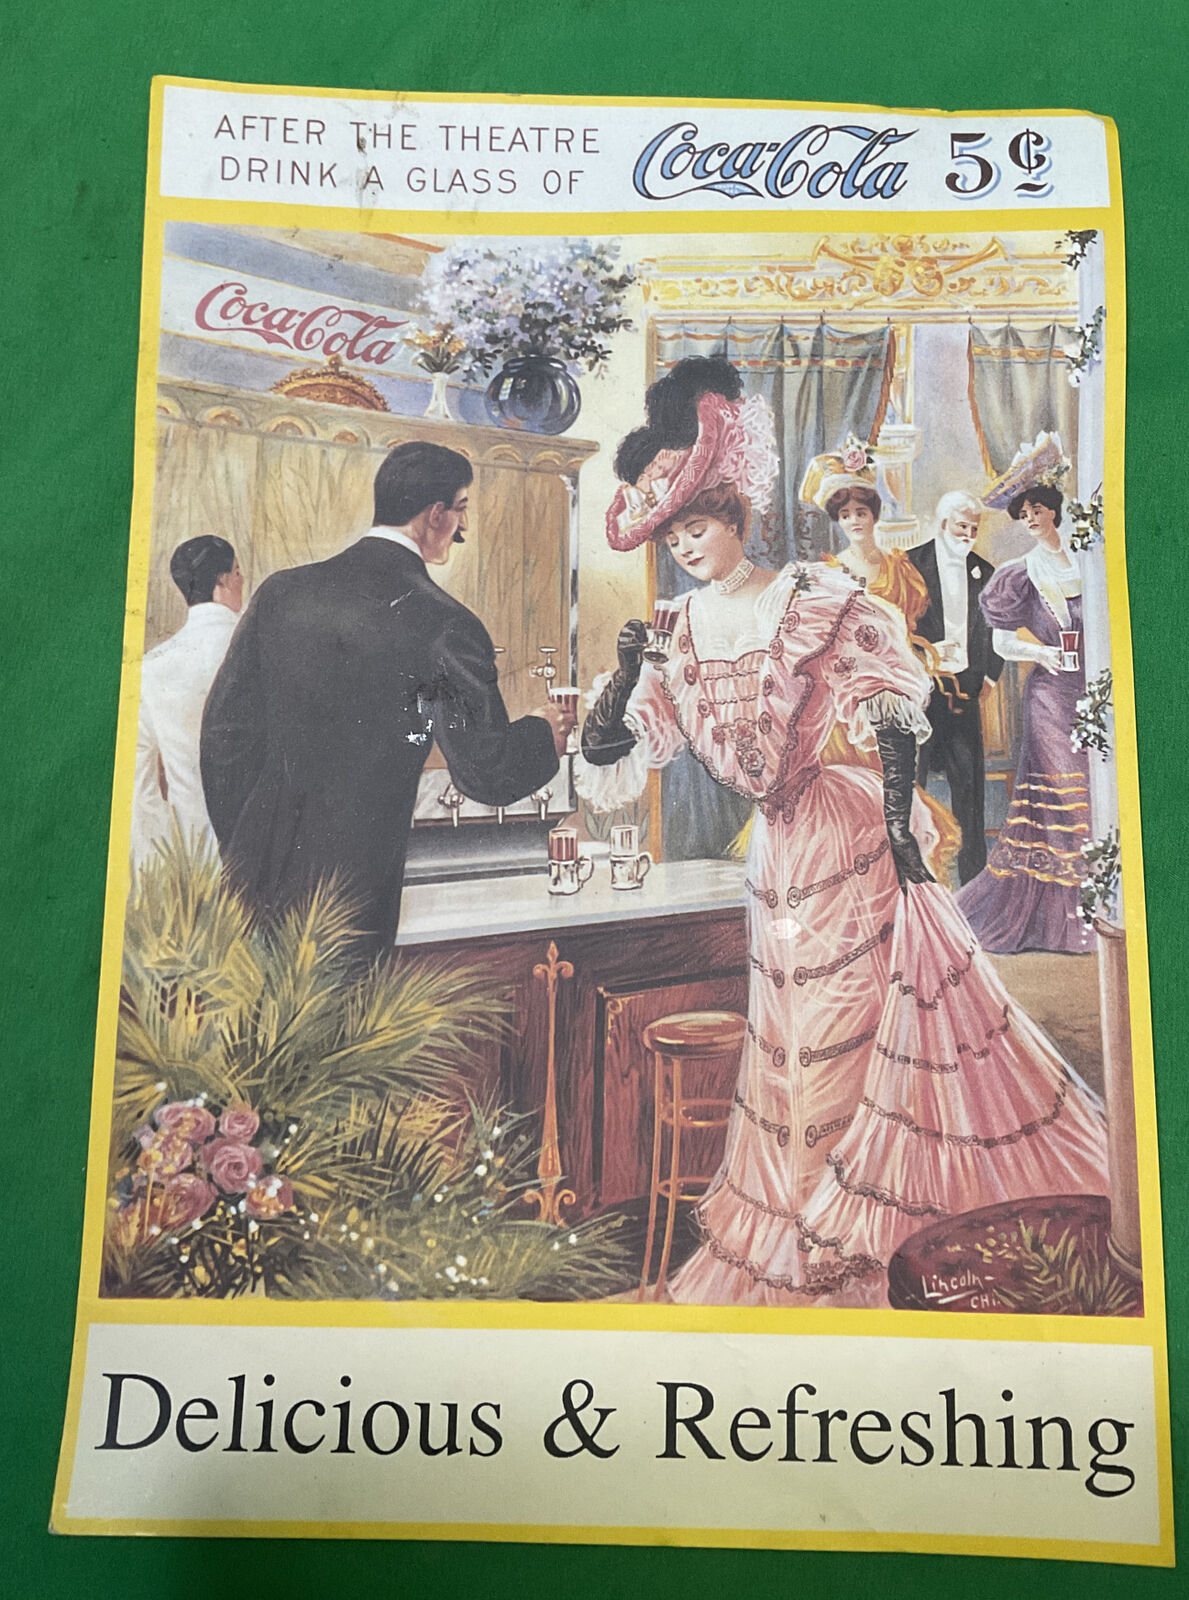 VTG COCA-COLA AFTER THE THEATRE POSTER 9” X12.5”- Delicious &Refreshing.